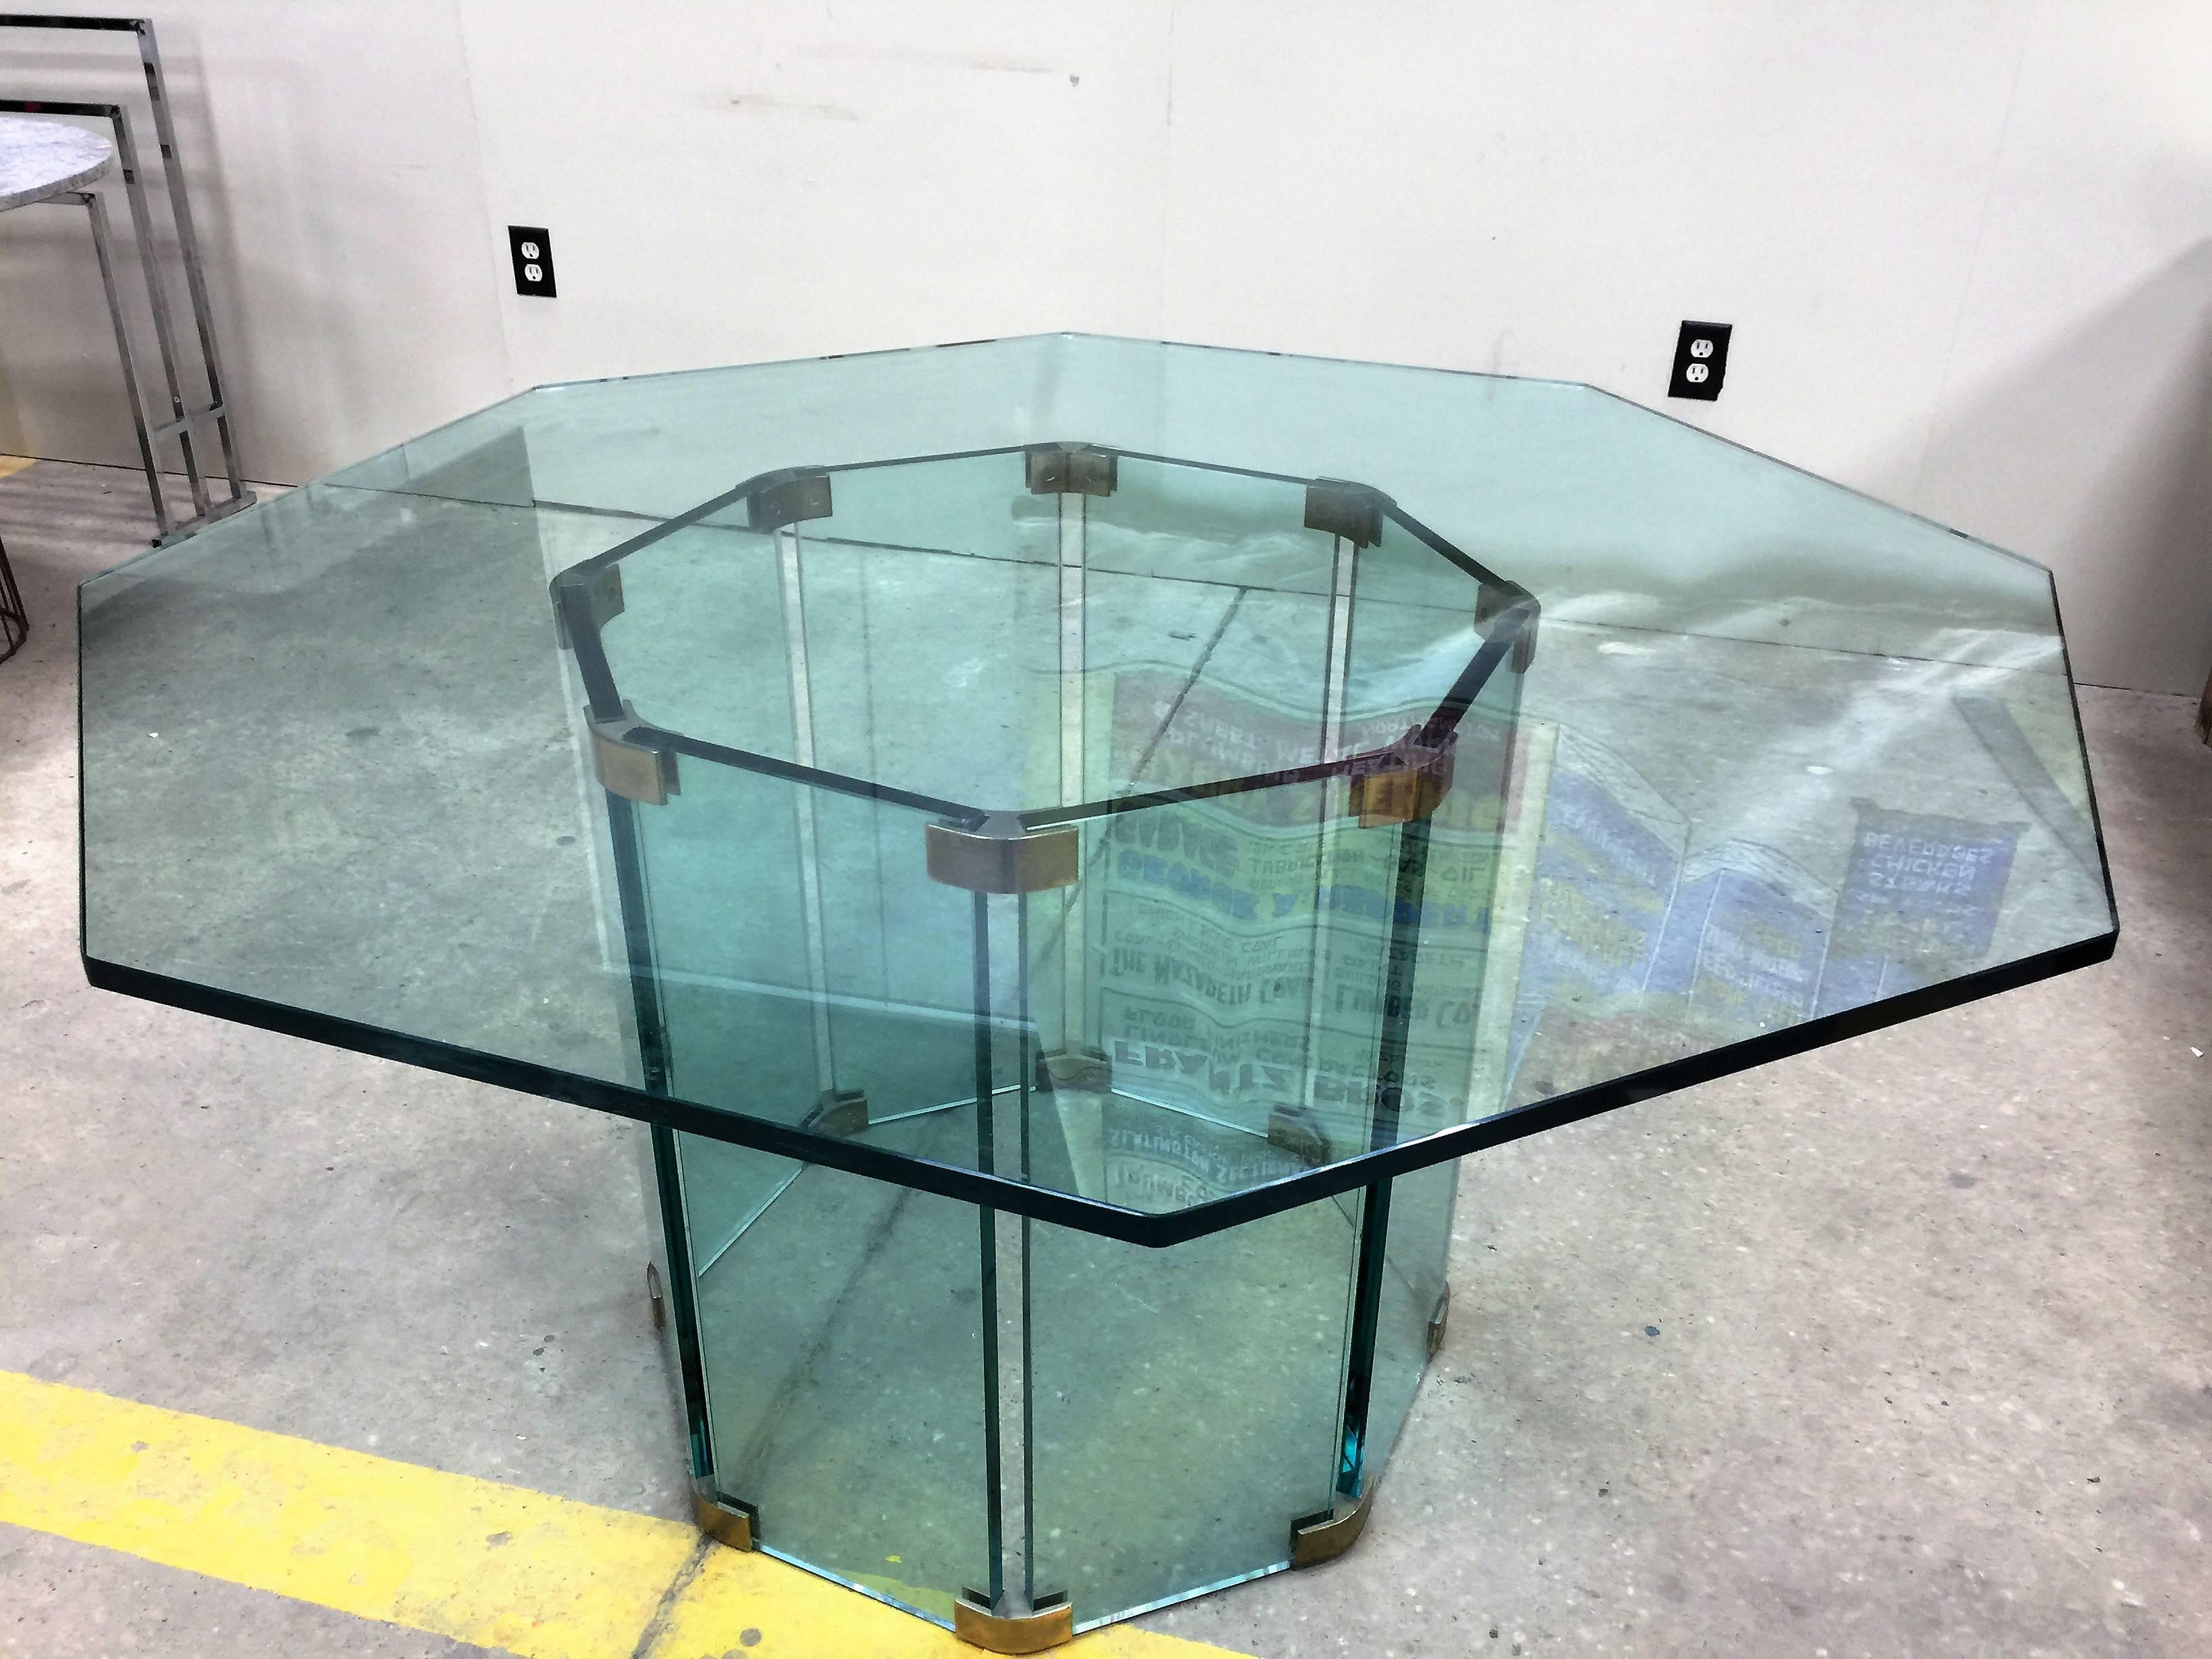 Amazing octagonal glass and chromed brass frame dining or center table.
This 1970s glass table designed by The Pace Collection. A substantial table that is suitable for many styles of interiors. The base size is 27